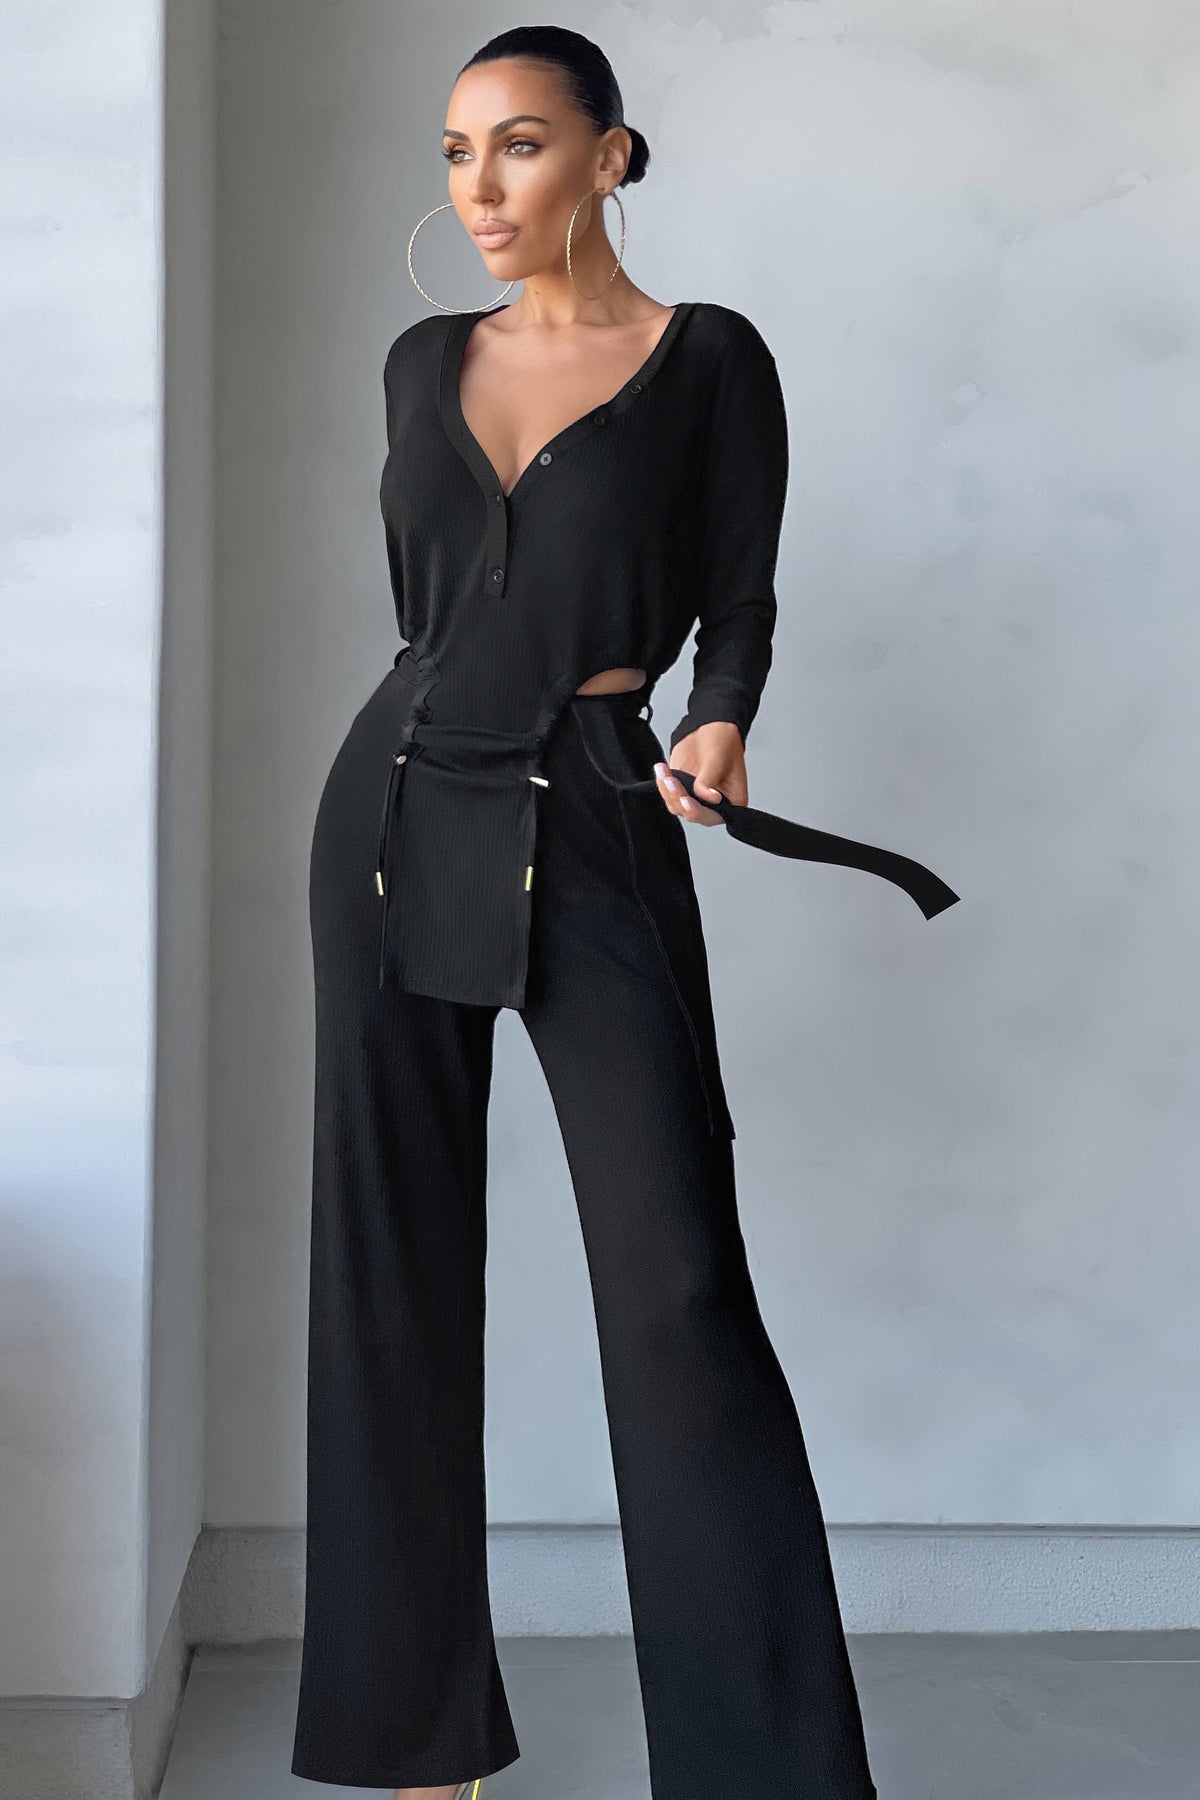 Forever 21 Bottoms Pants and Trousers  Buy Forever 21 Belted Palazzo Pants  Online  Nykaa Fashion